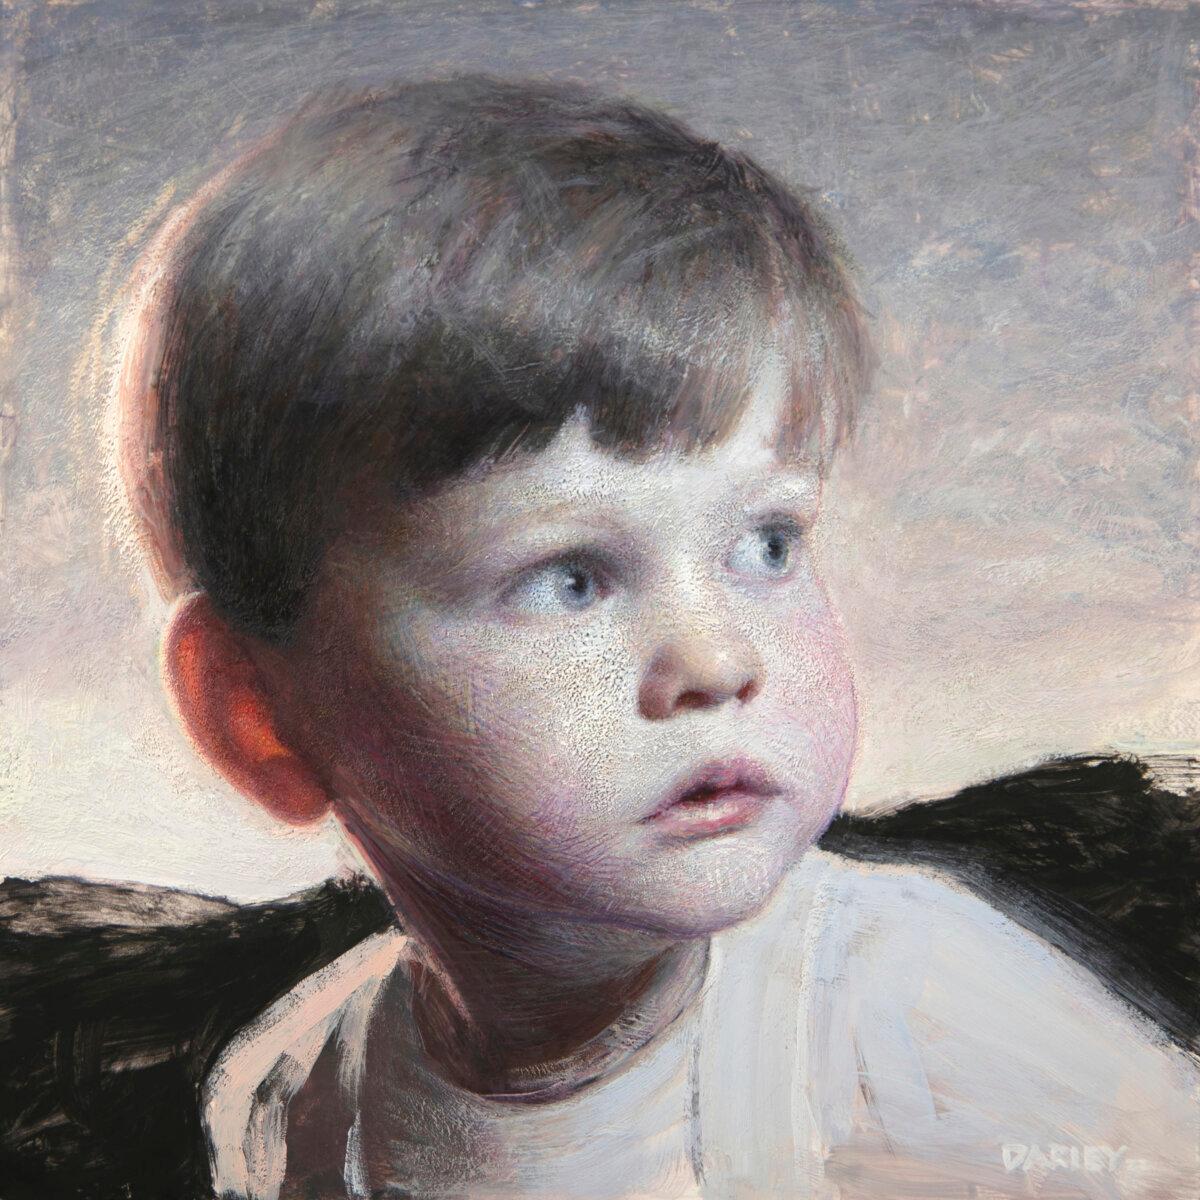 “Henry” by John Darley. Egg tempera on panel; 10 inches by 10 inches. (Courtesy of John Darley)